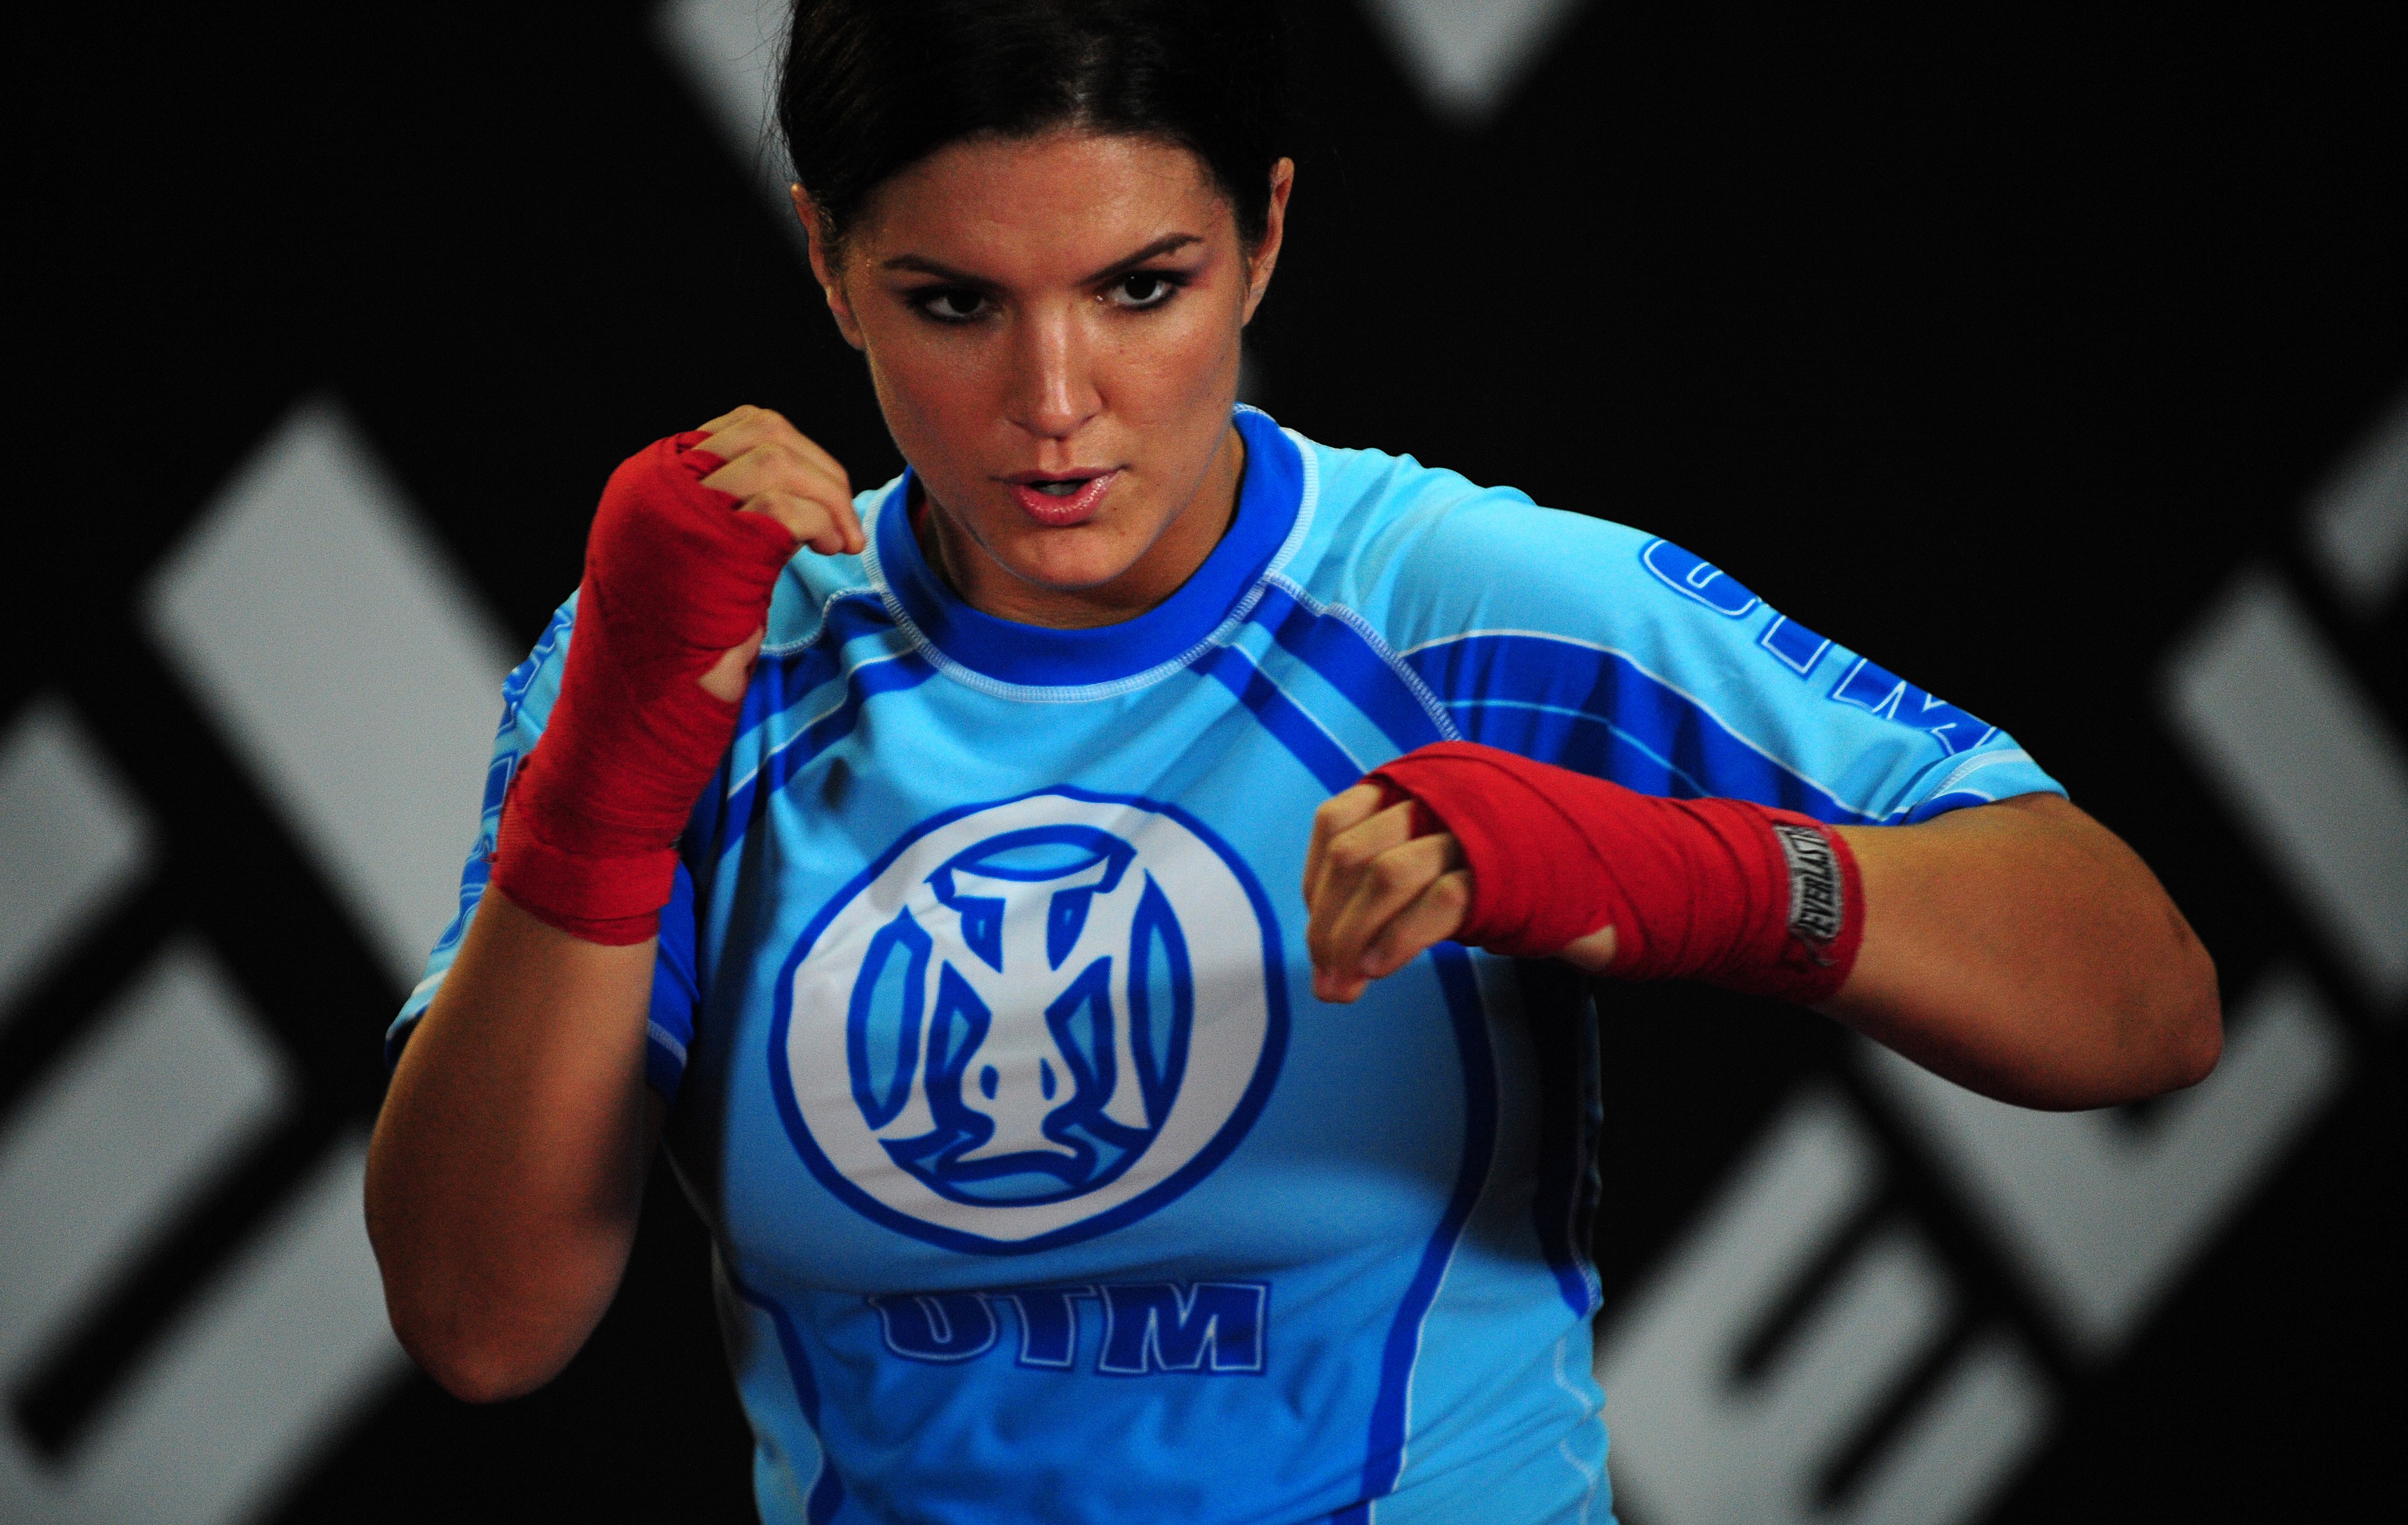 Gina Carano Mma Brunette Brown Eyes Hand Wraps 4100x2597